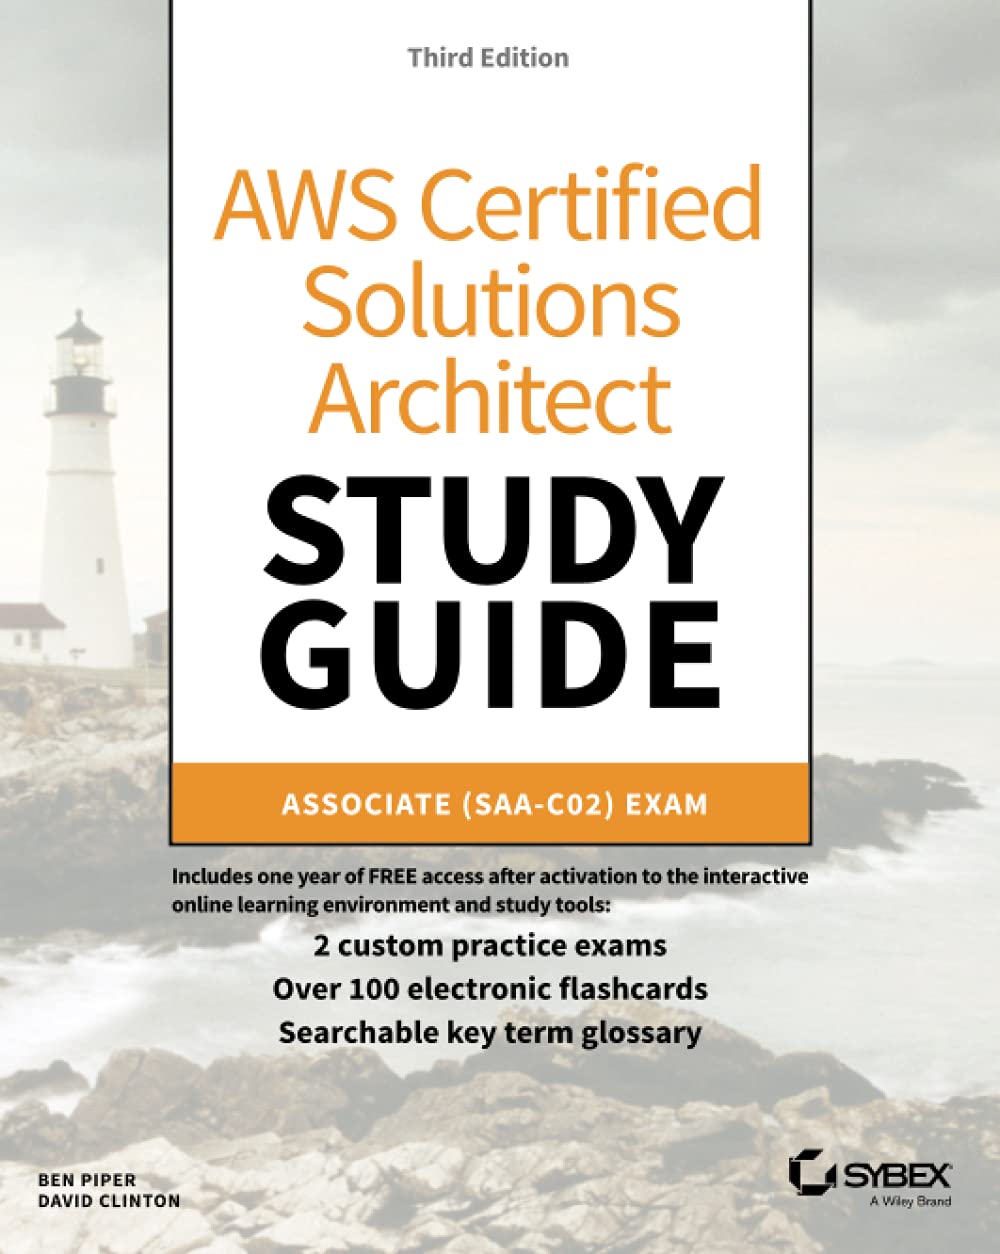 AWS Certified Solutions Architect Study Guide: Associate SAA-CO2 Exam (Aws Certified Solutions Architect Official: Associate Exam)